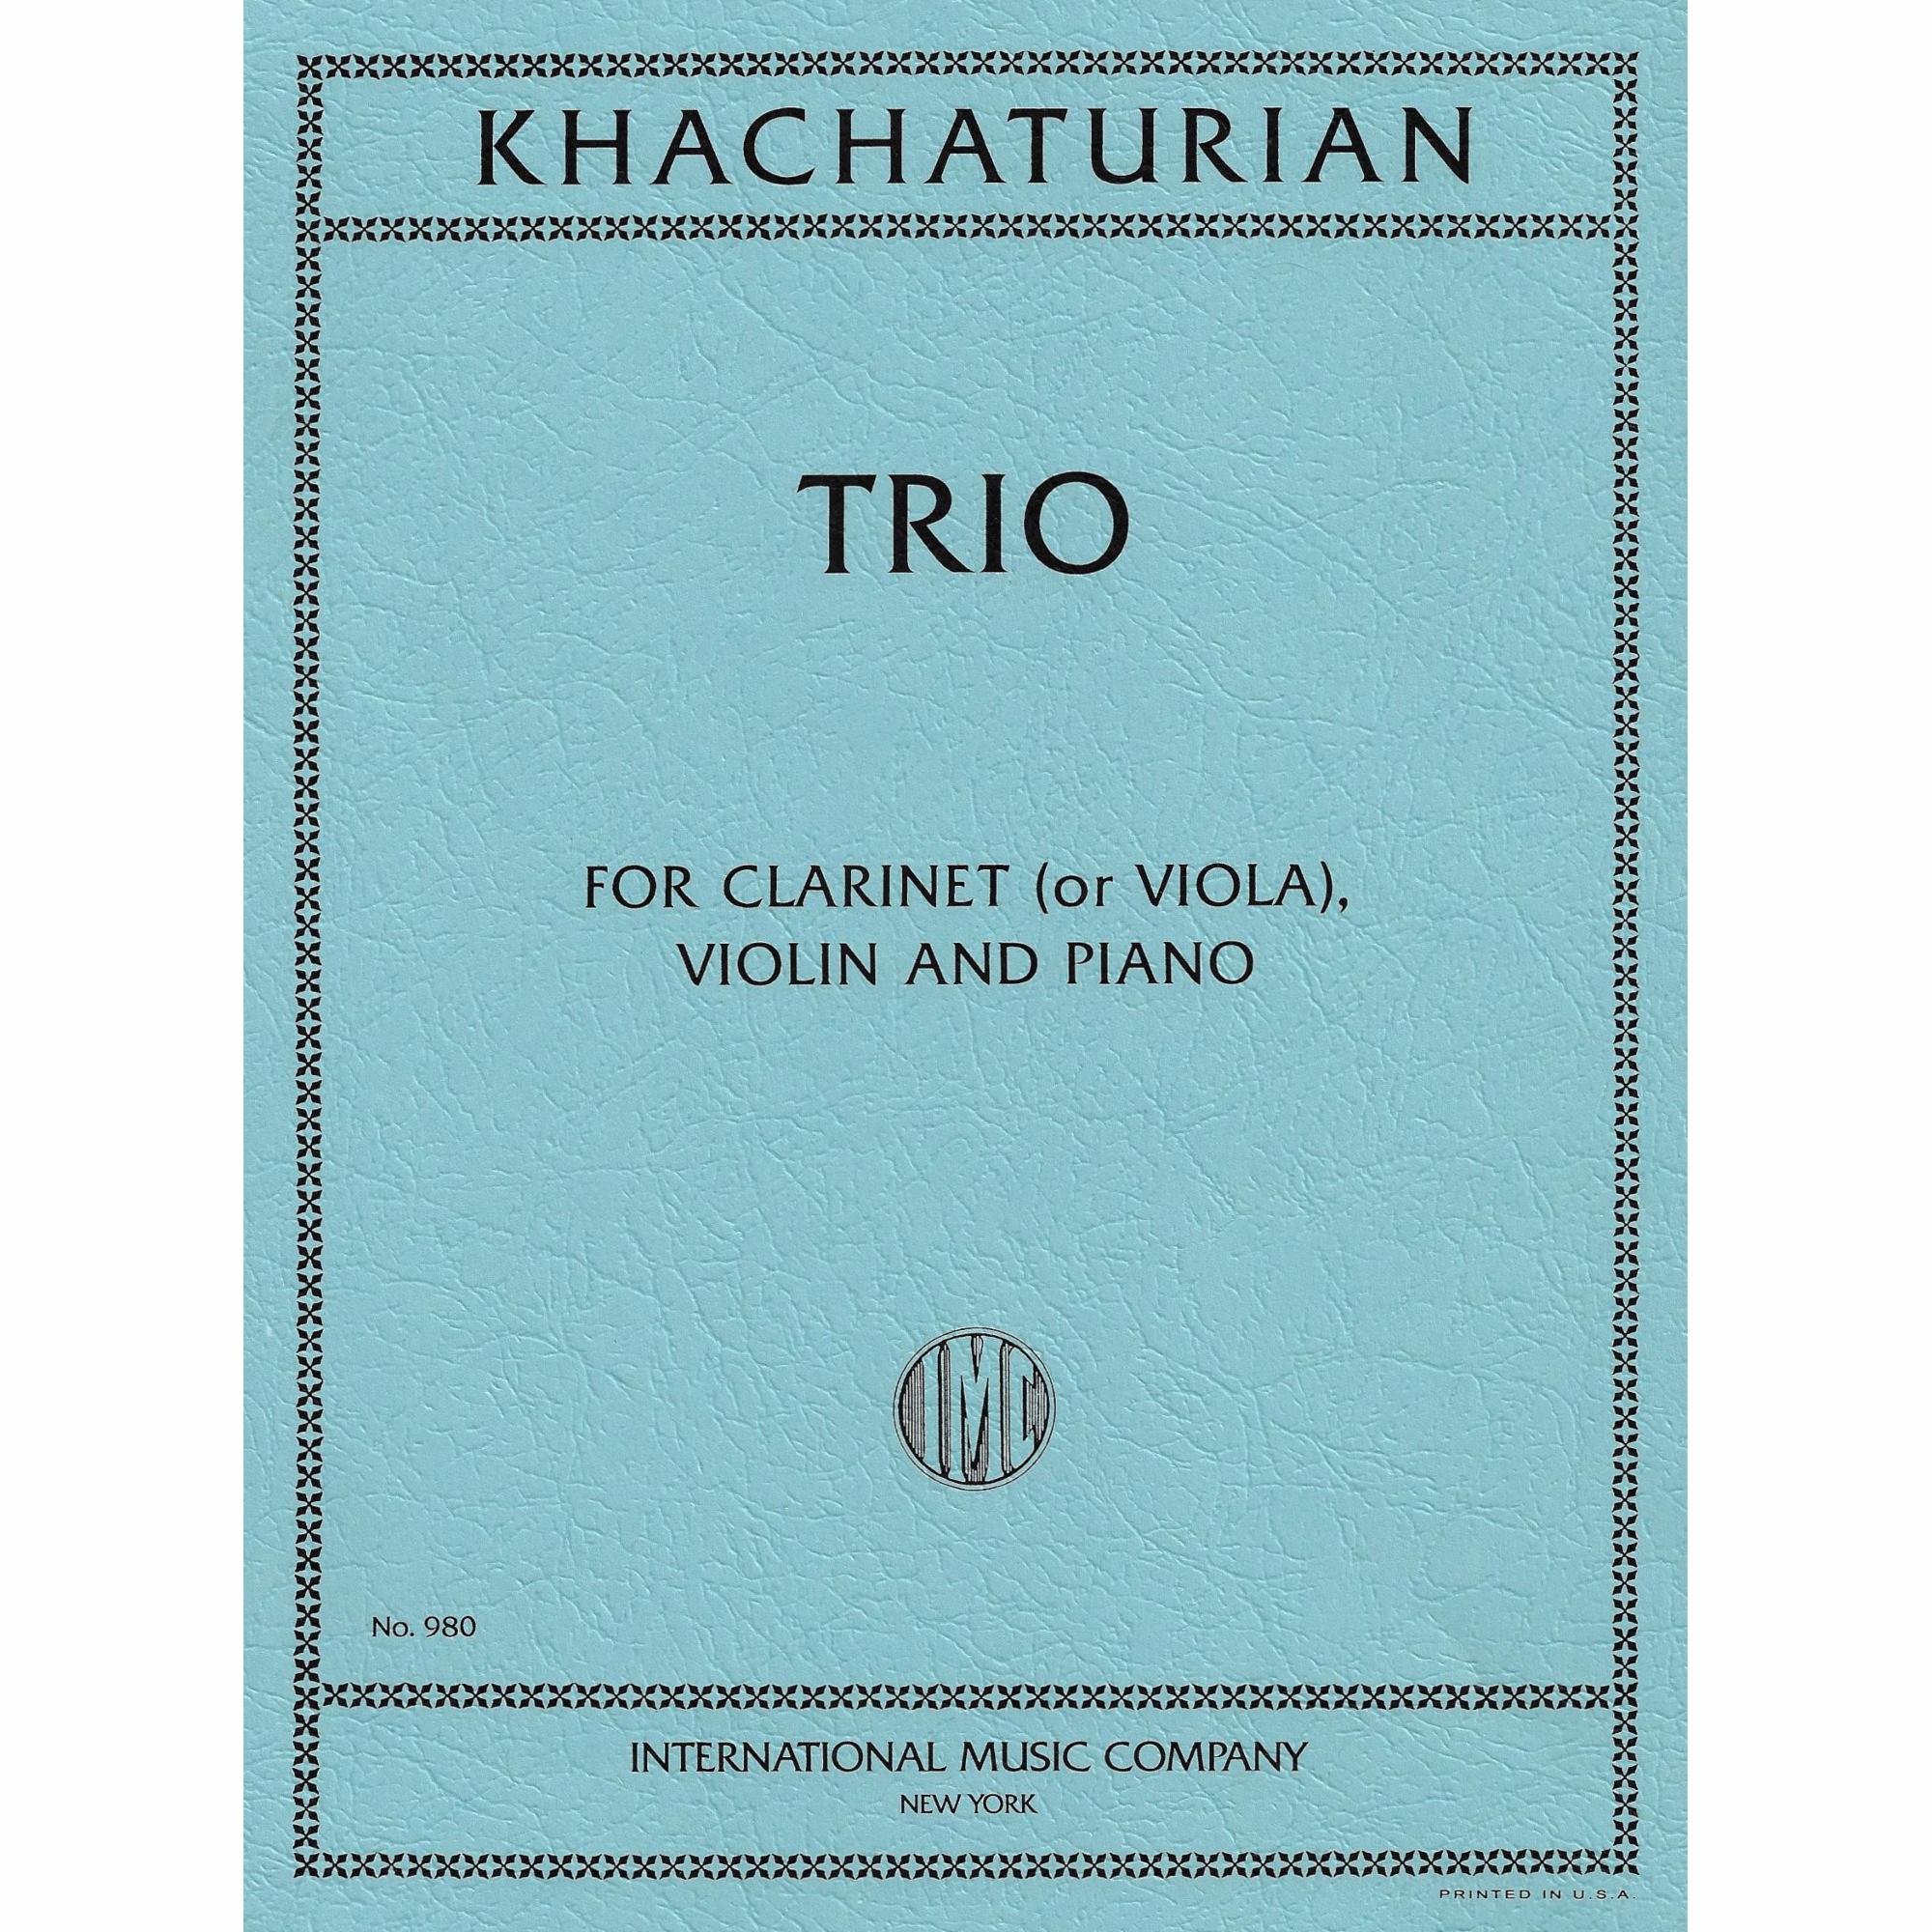 Khachaturian -- Trio for Clarinet, Violin, and Piano